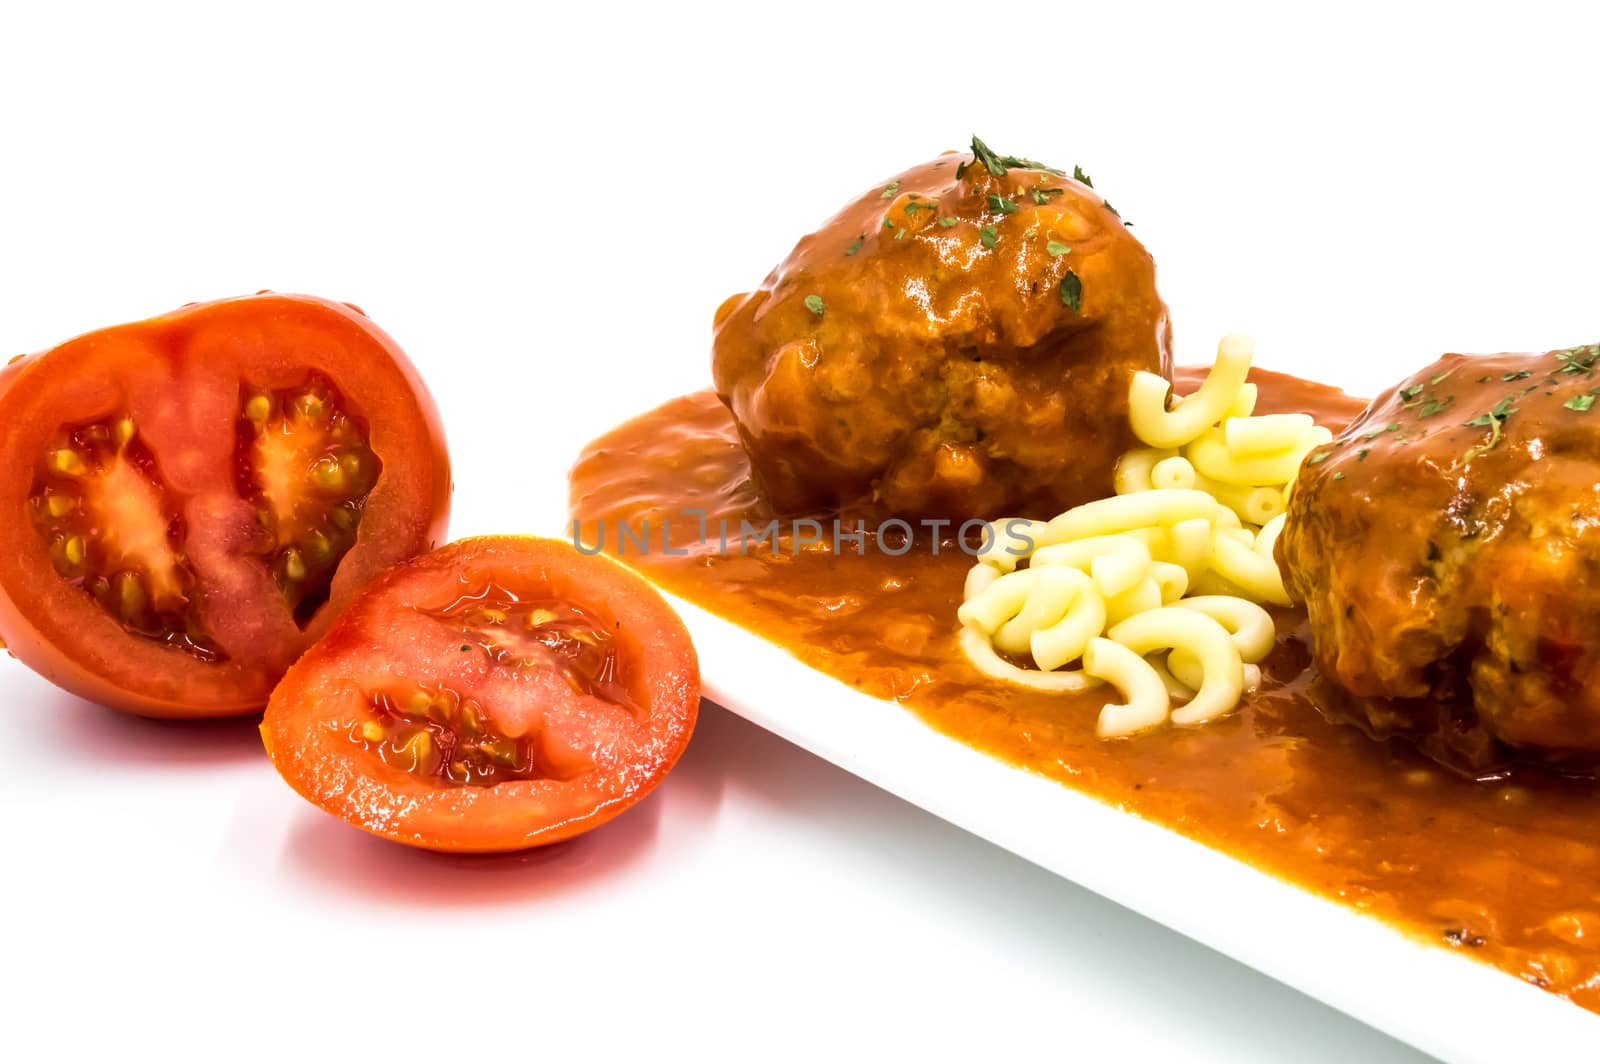 Meatballs cooked in tomato sauce with small pasta on white background